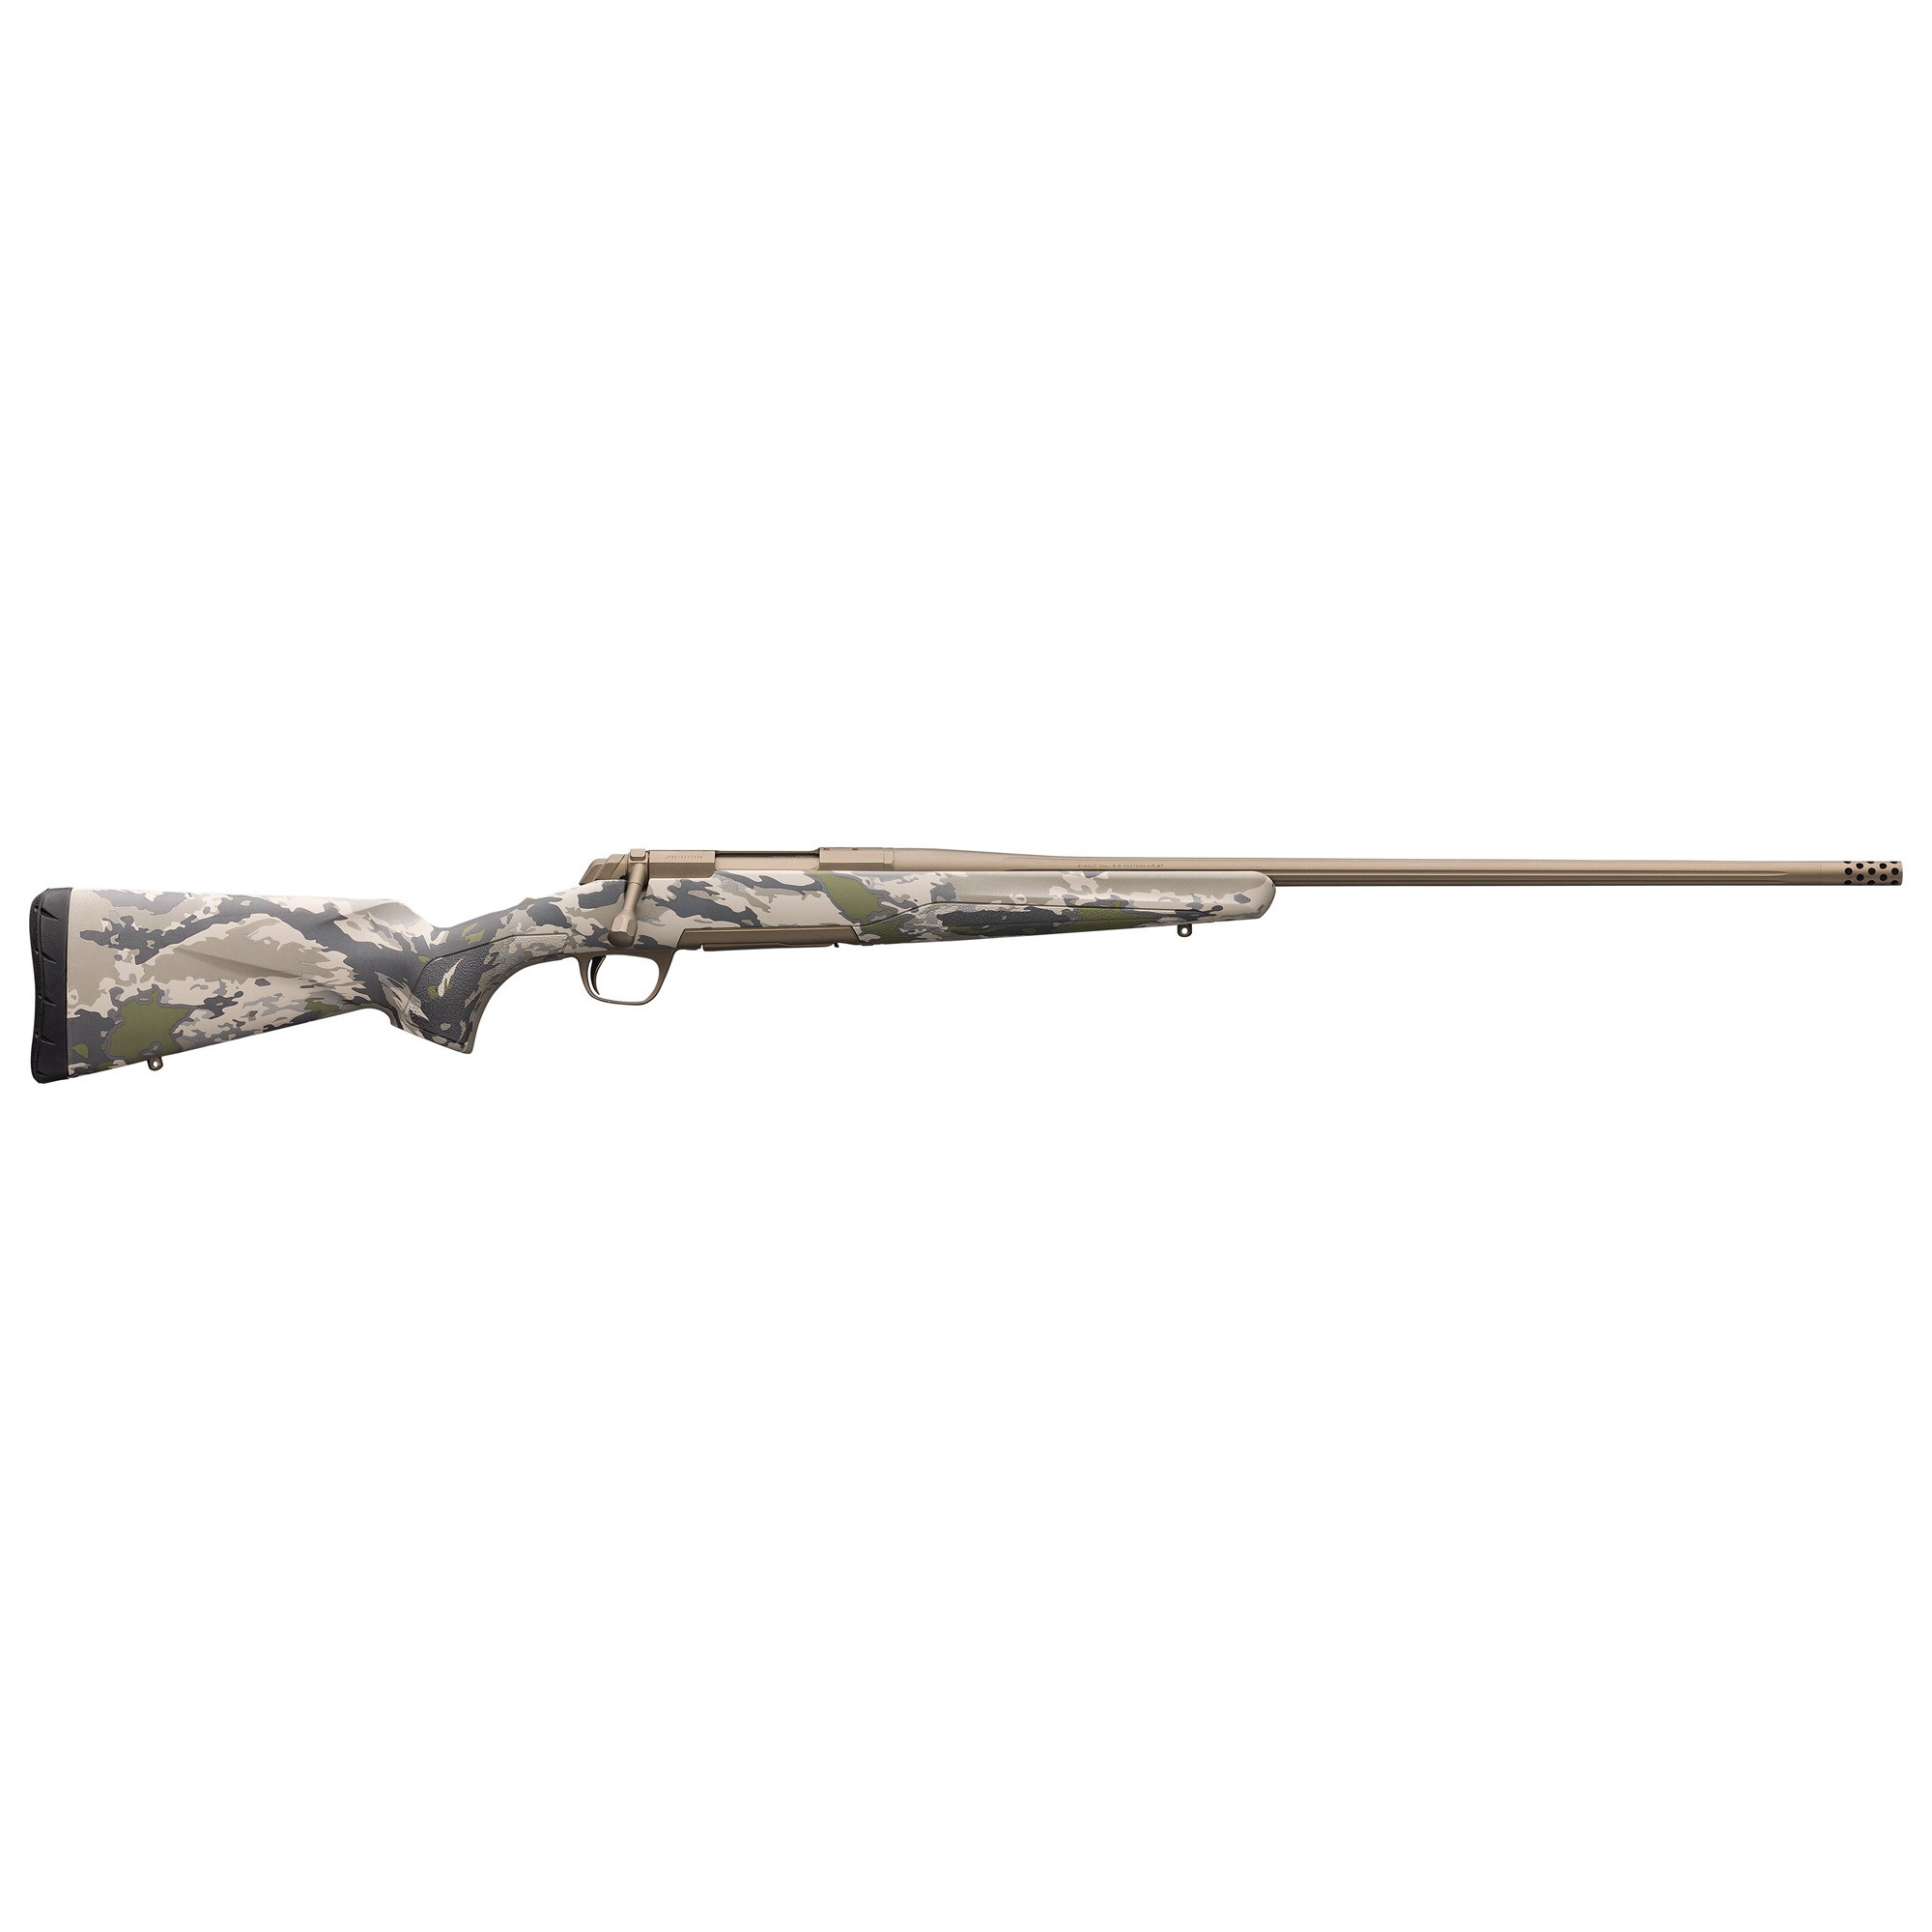 Browning, X-Bolt Speed, Hunting Rifle, Bolt Action, 308 Winchester, 22" Barrel, Fluted Barrel - Threaded M13X.75, Smoked Bronze, OVIX Camo Stock, 4 Rounds, Right Hand